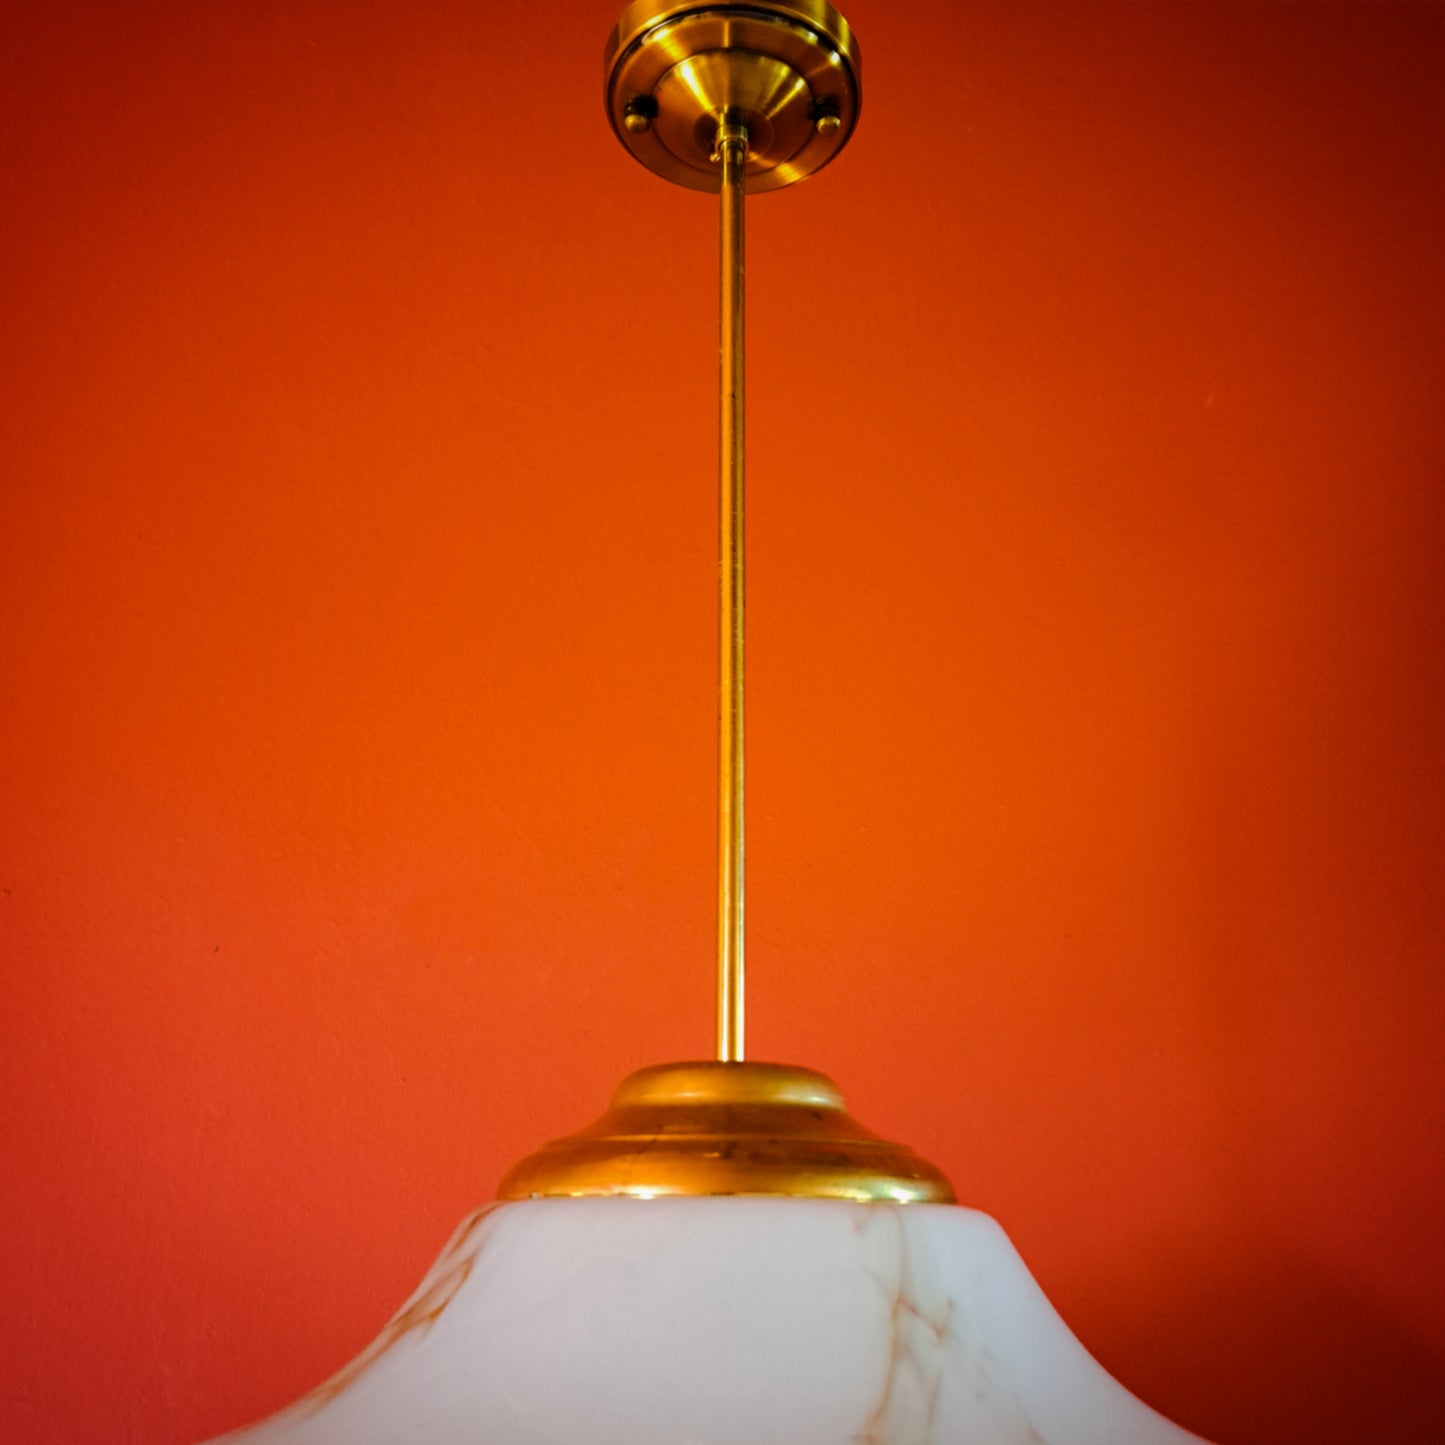 Large 1960s marble opaline glass pendant light with brass fittings